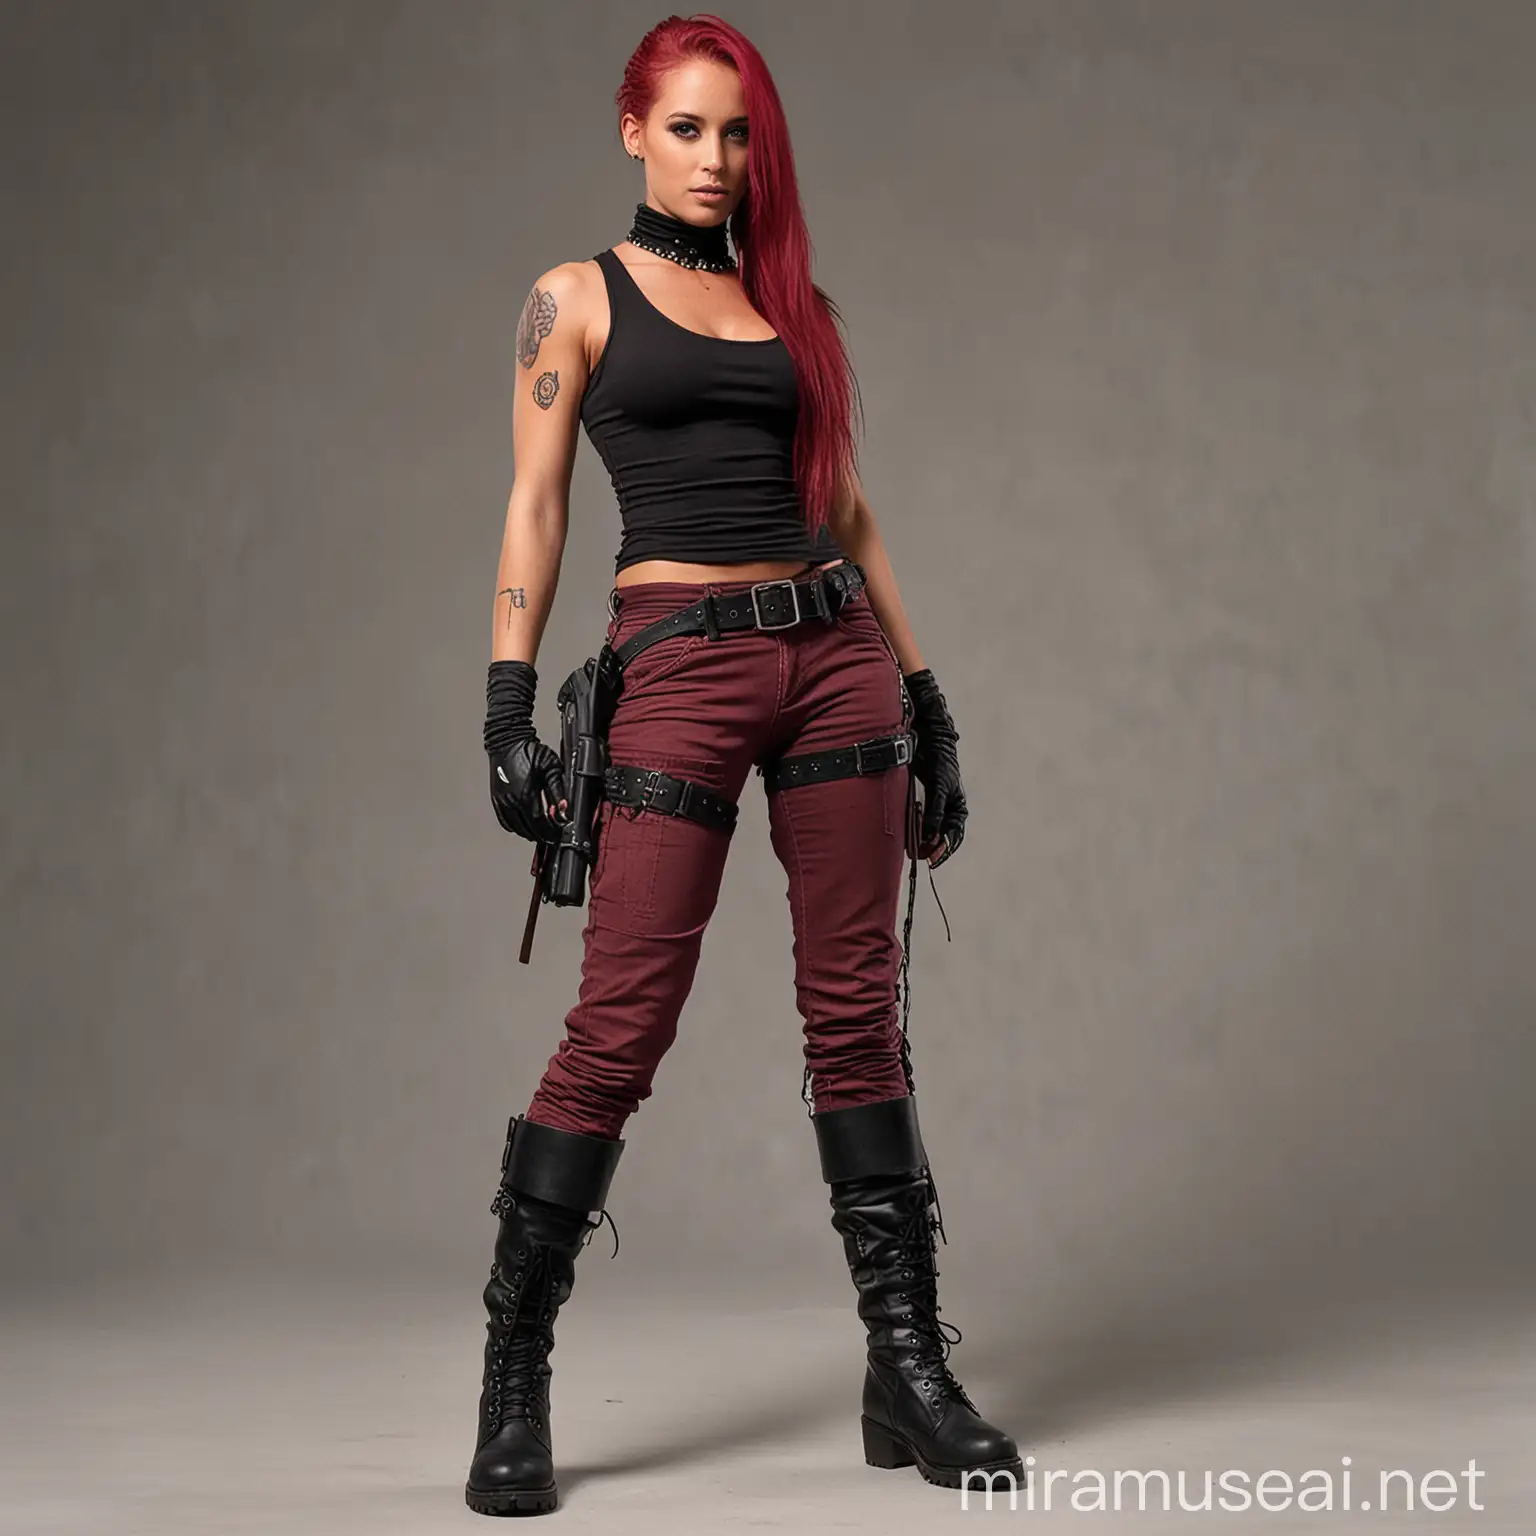 Charismatic Woman with RaspberryColored Hair and Tactical Attire